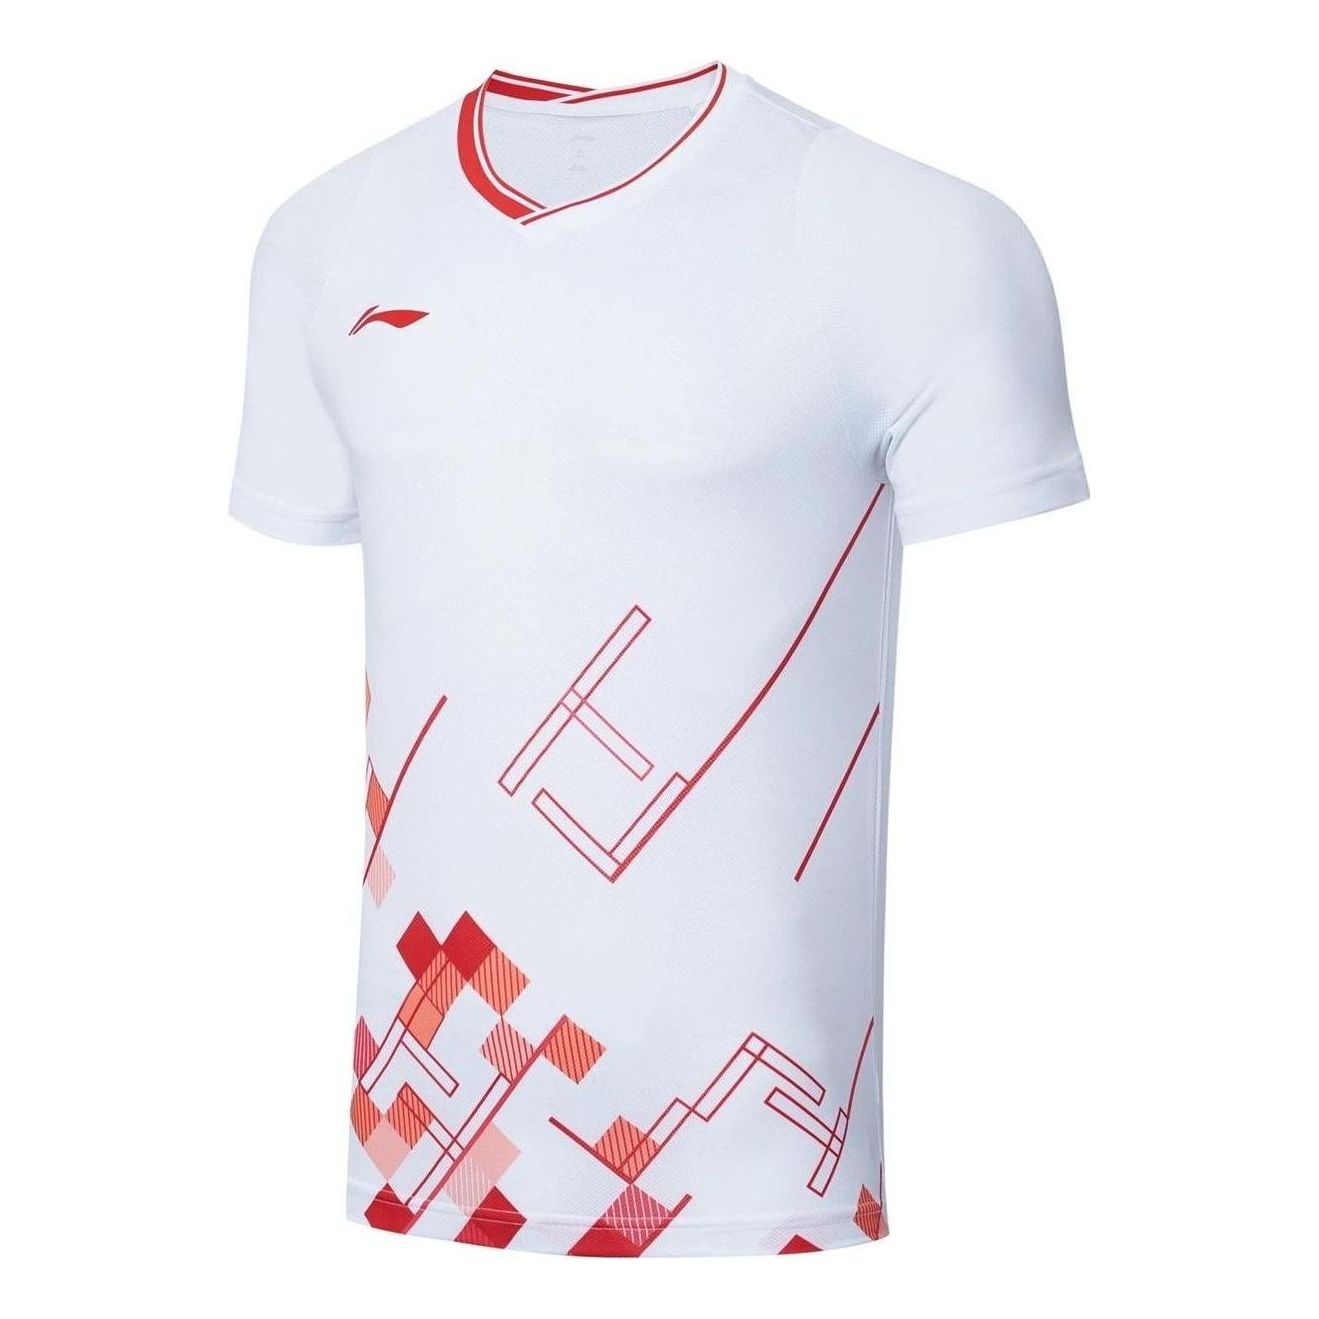 Li-Ning Graphic Badminton Competition T-shirt 'White Red' AAYT057-1 - 1